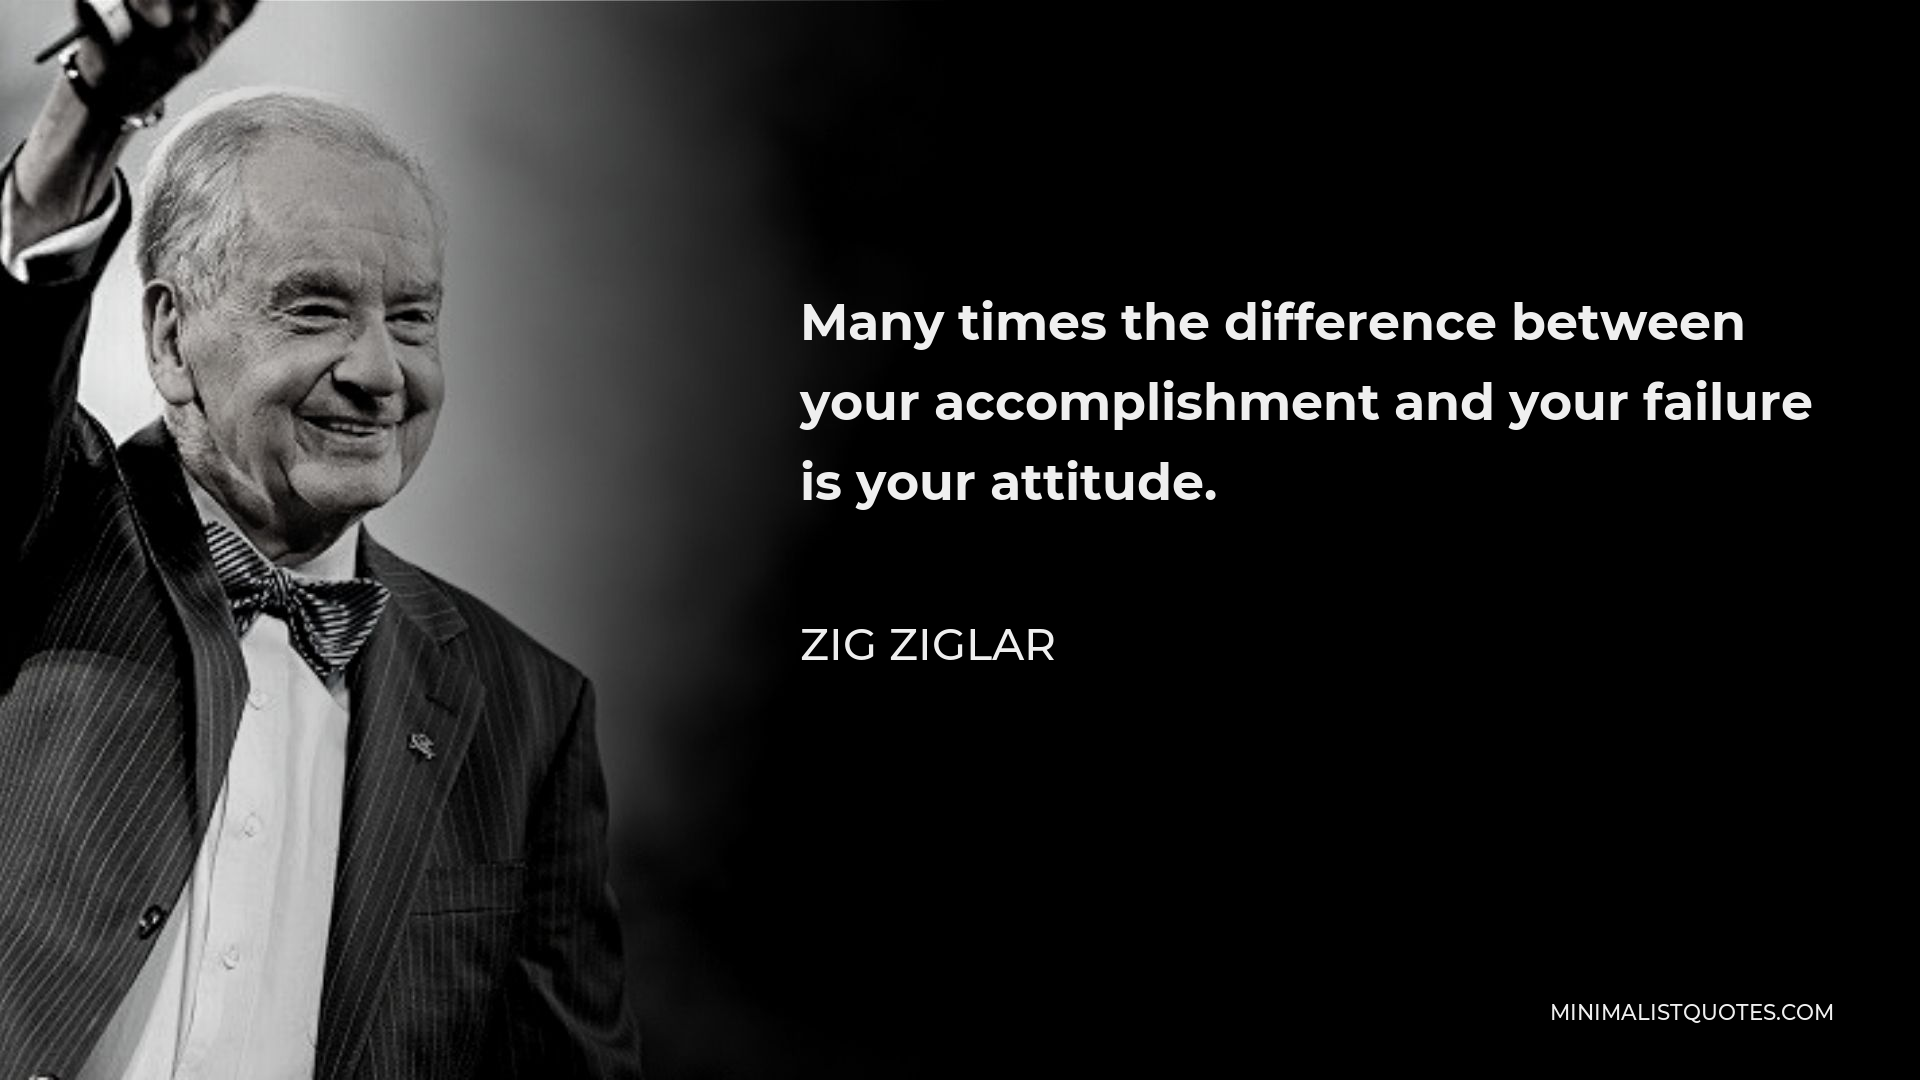 Zig Ziglar Quote - Many times the difference between your accomplishment and your failure is your attitude.